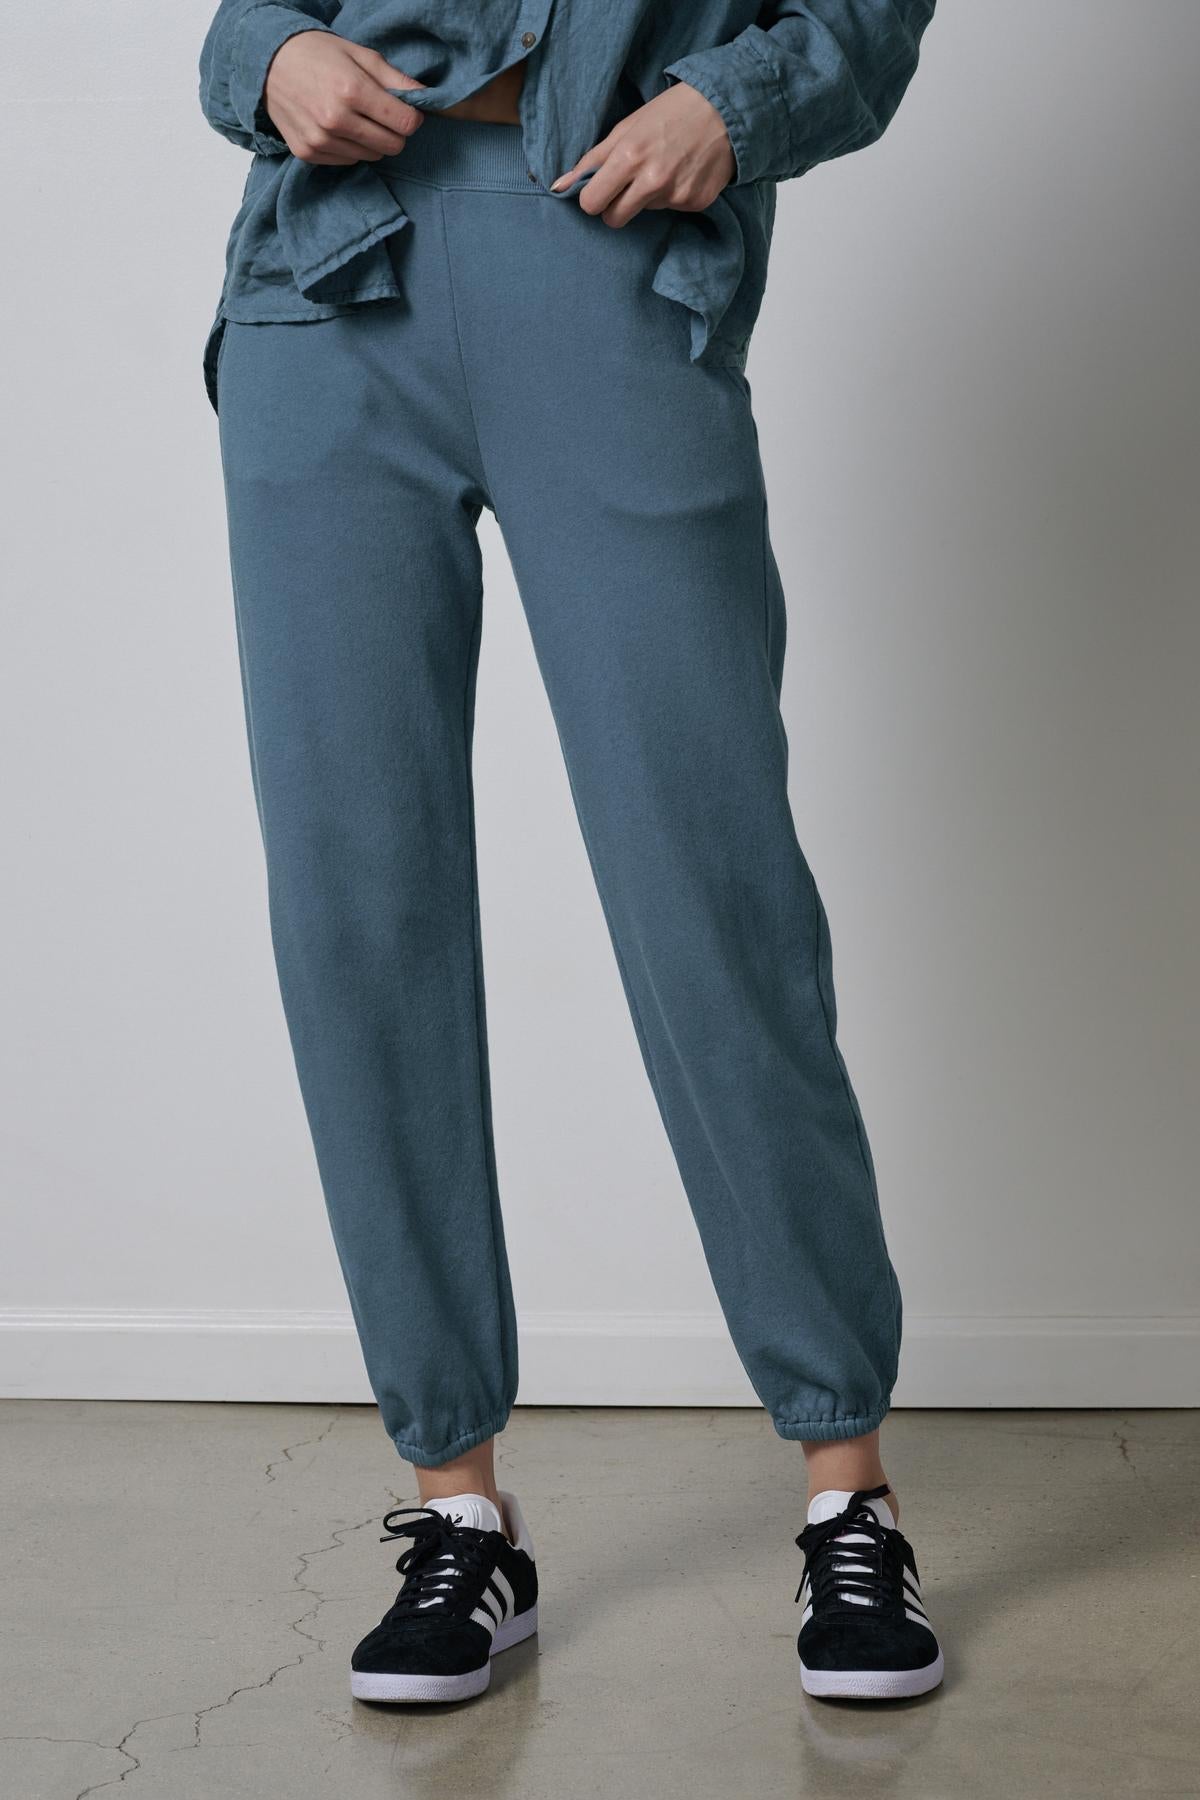 A person standing against a neutral background, wearing a blue button-up shirt and matching blue Velvet by Jenny Graham ZUMA SWEATPANTS with black sneakers.-36594728009921